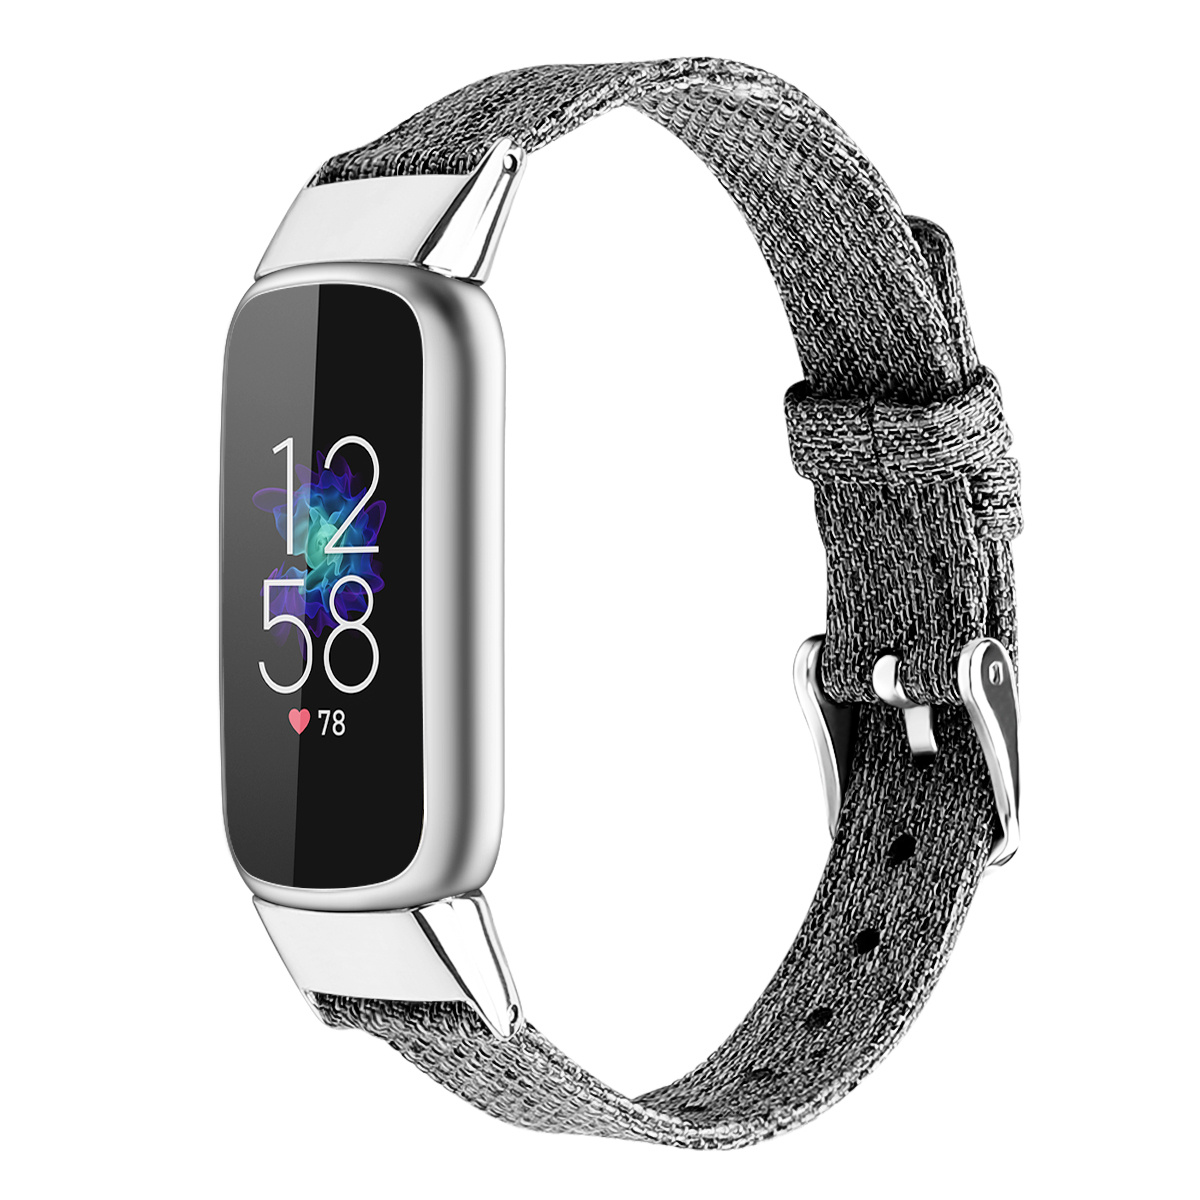 NINKI Compatible Thin & Light Fitbit Luxe Bands for Women Men,Soft  Breathable Woven Fabric Bracelet Strap Fitbit Luxe Replacement Bands for  Fitbit